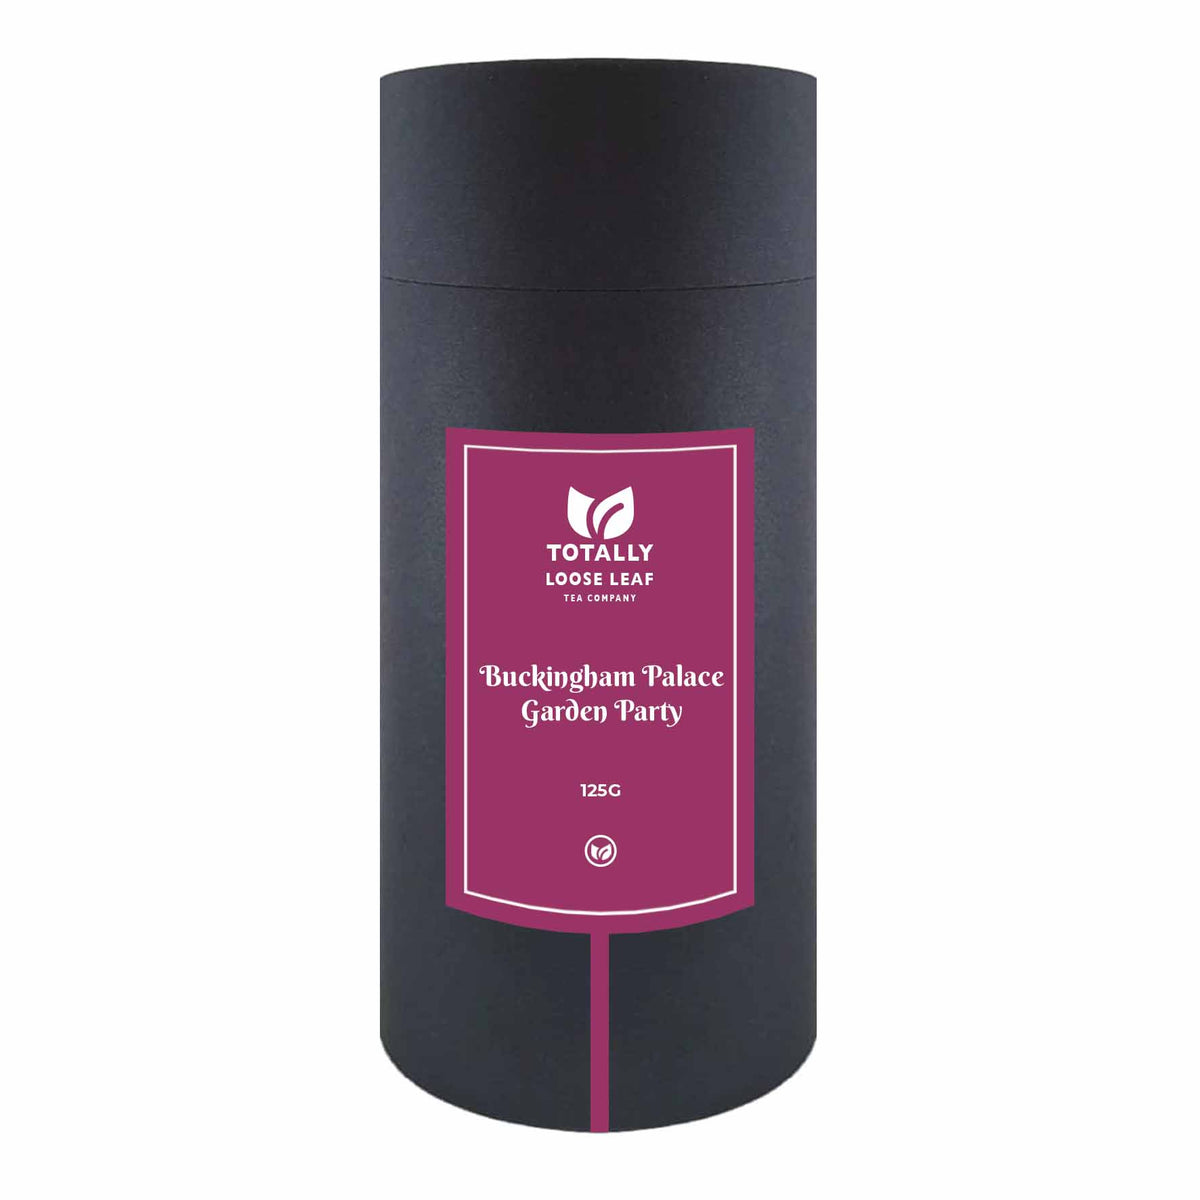 Buckingham Palace Garden Party Afternoon Loose Leaf Tea - tube